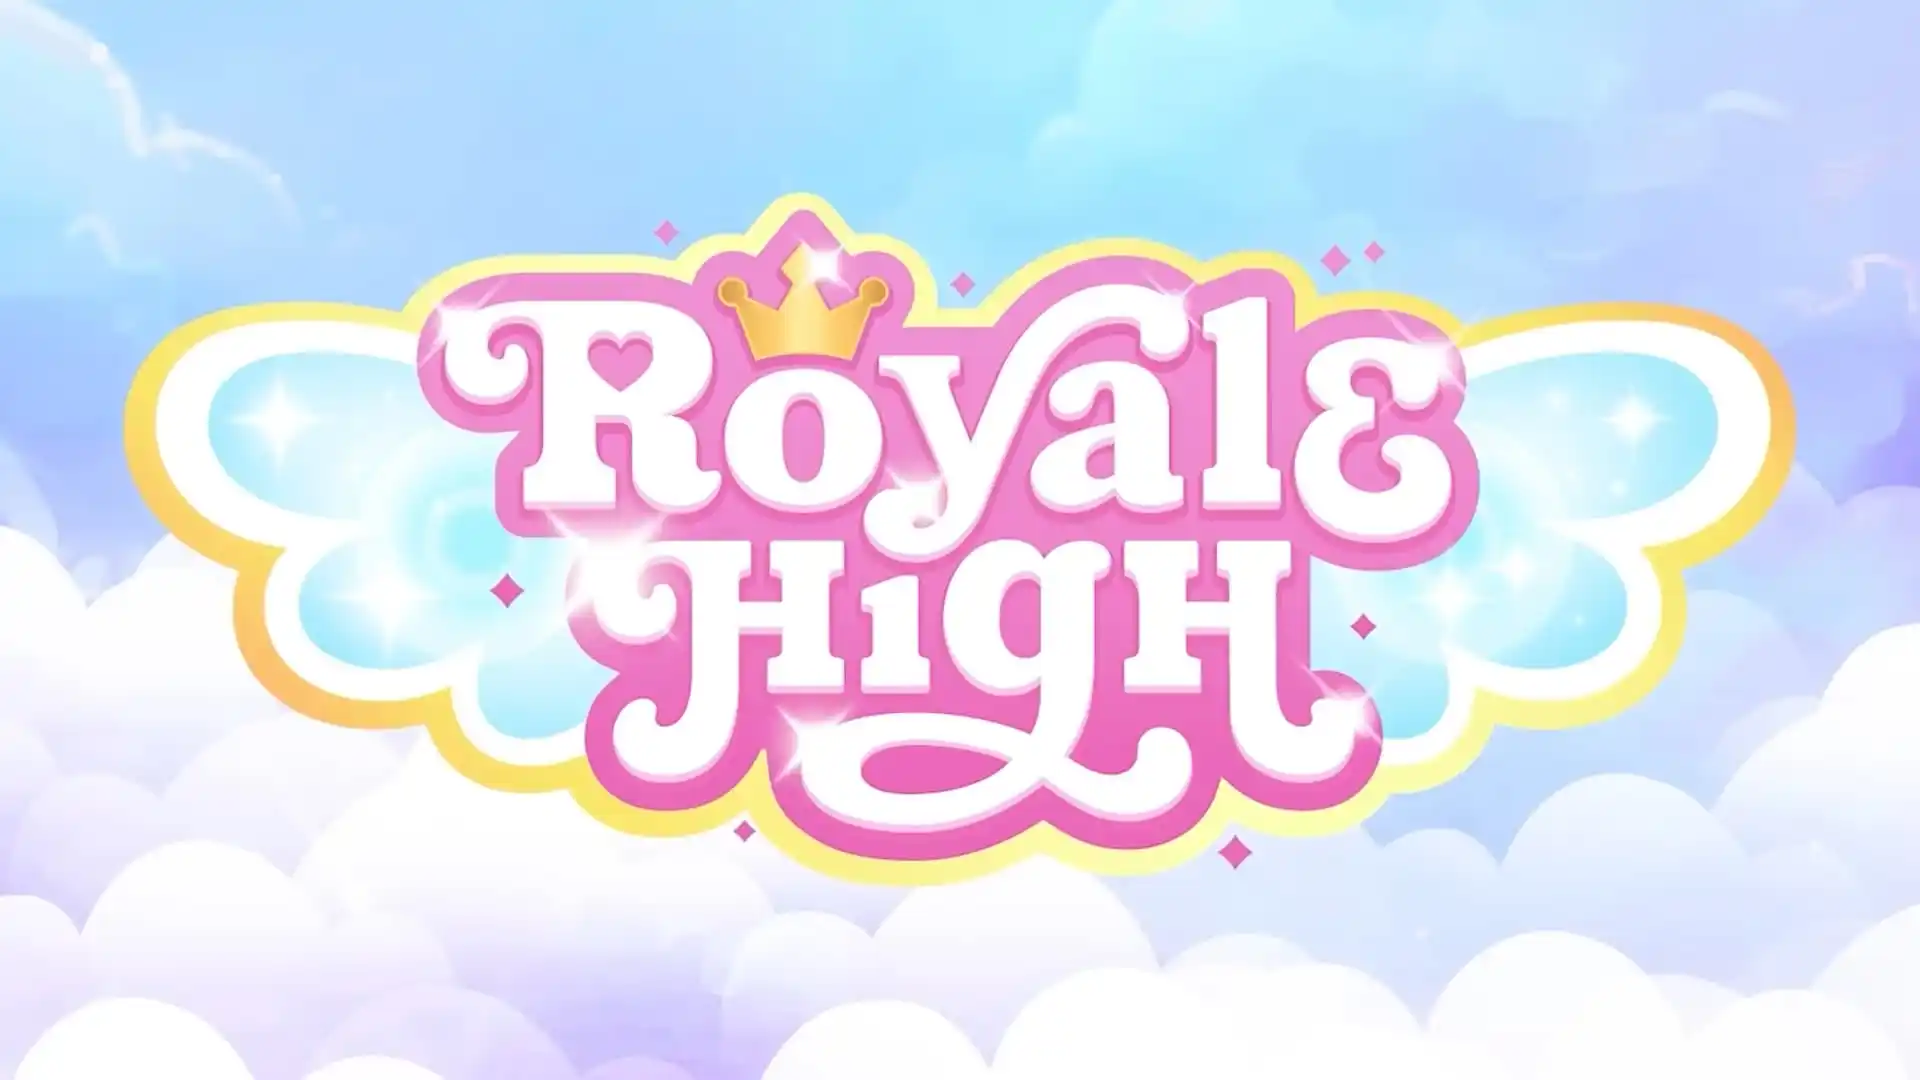 How to Get More Elements in Royale High Campus 3